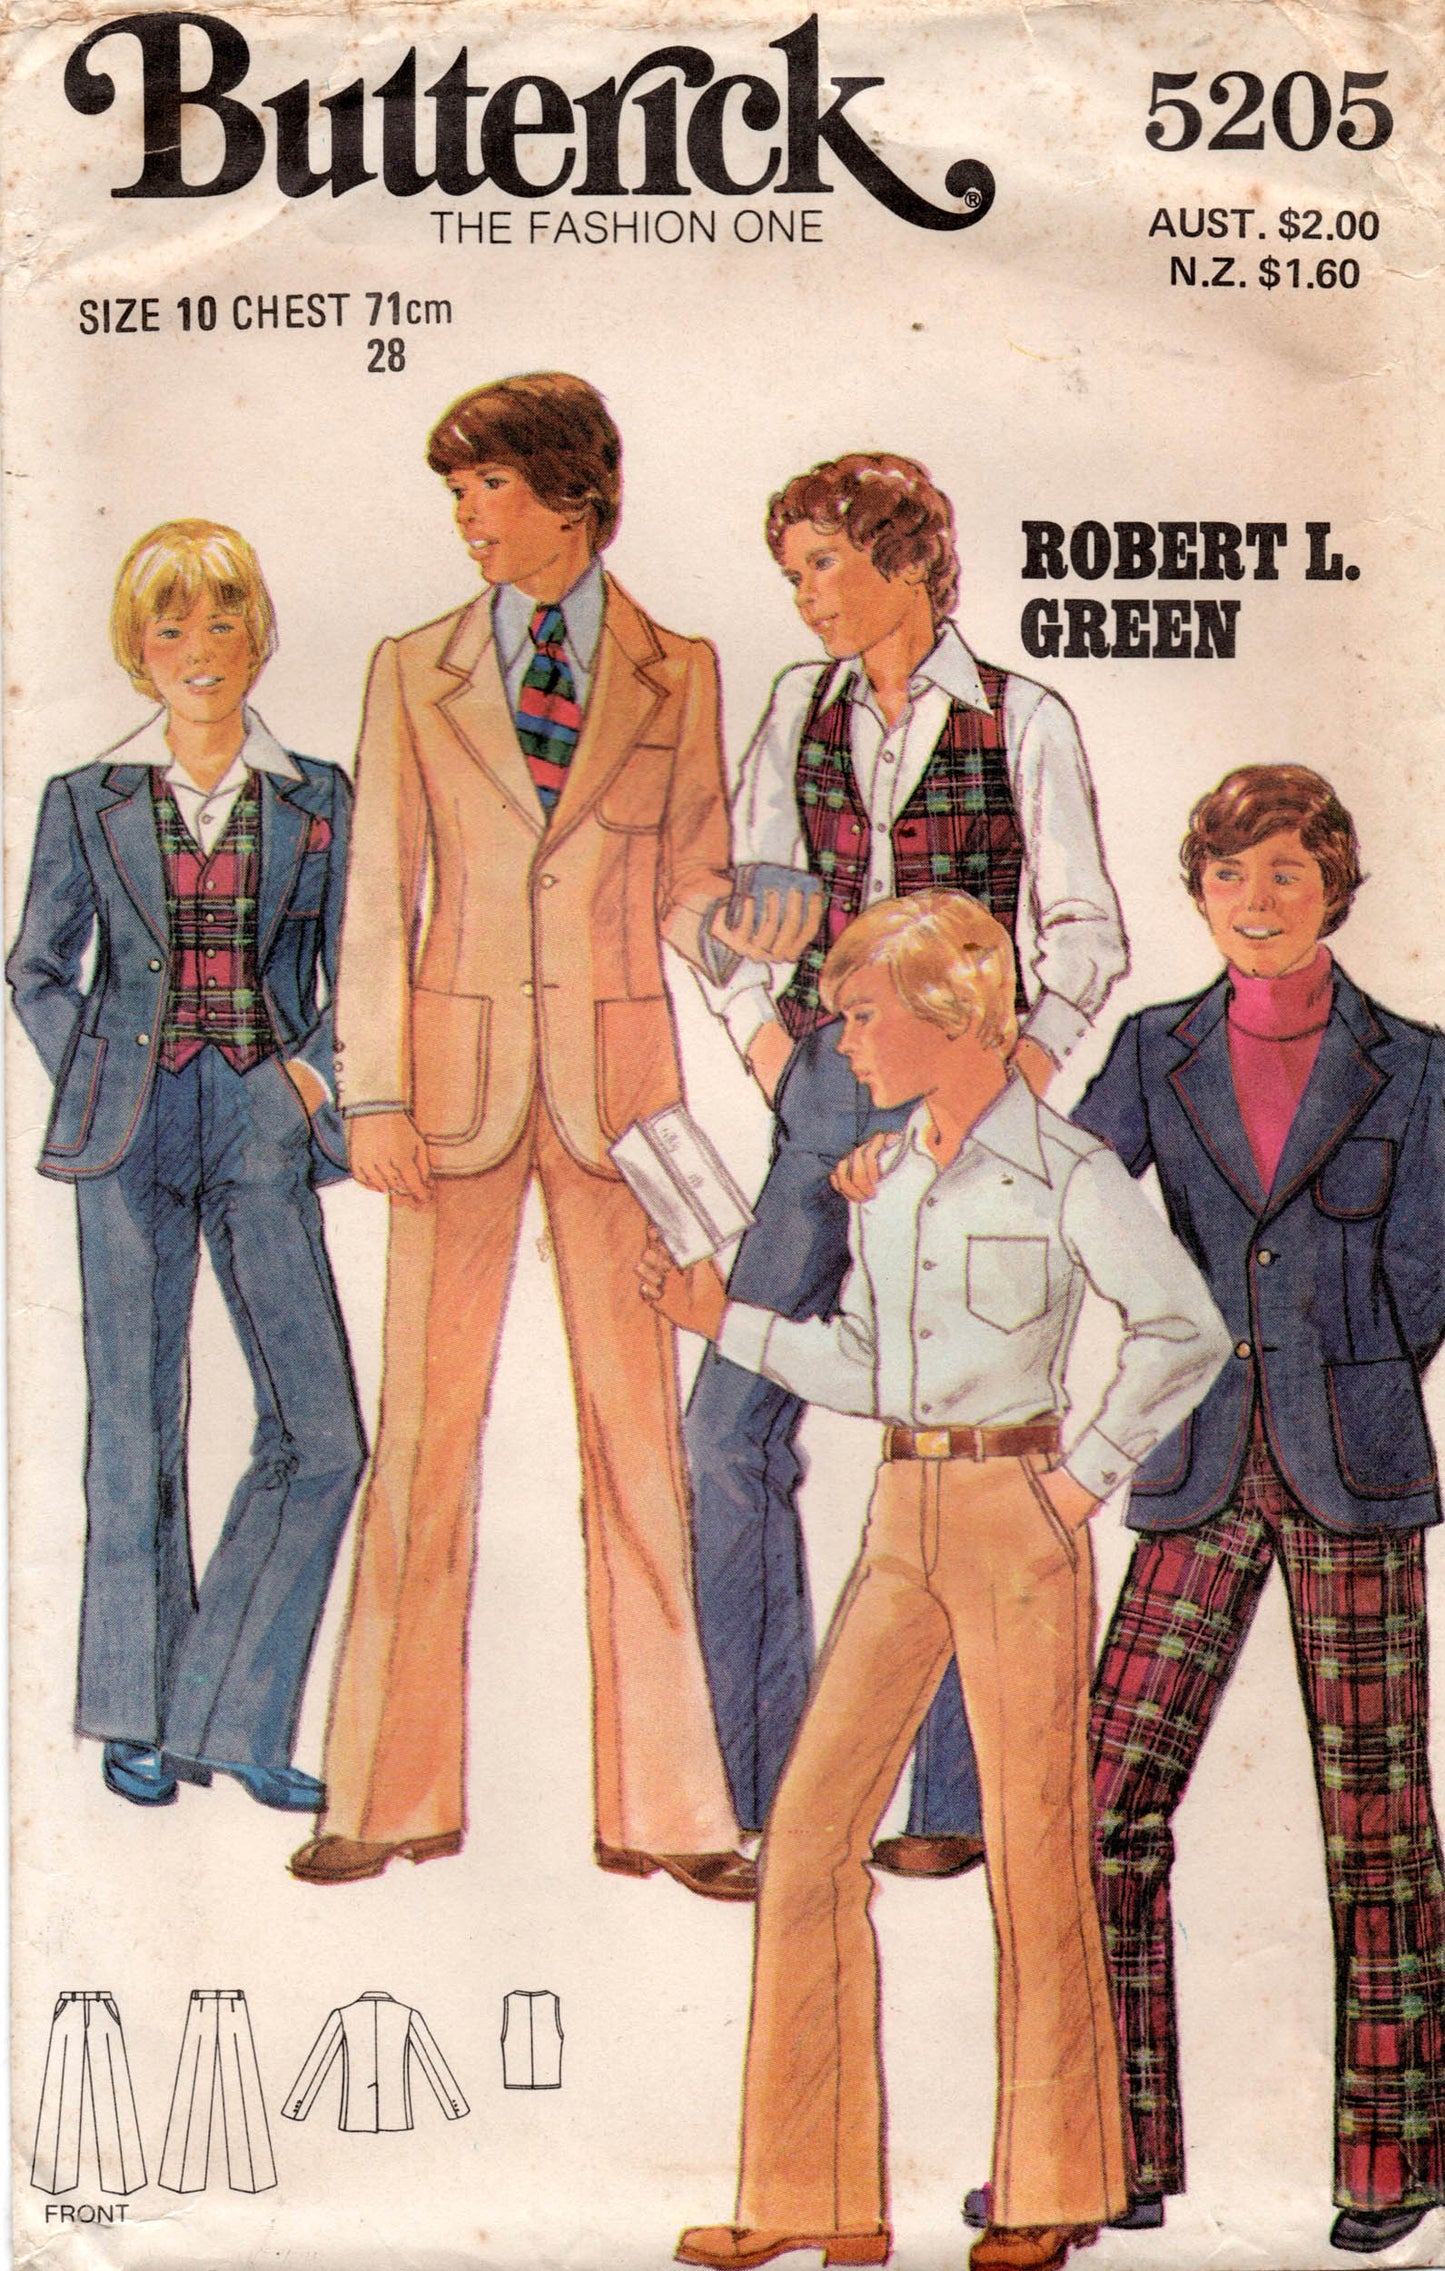 Butterick 5205 ROBERT L GREEN Retro Boys 3 Piece Suit with Wide Lapels 1970s Vintage Sewing Pattern MED Size 8 or 10